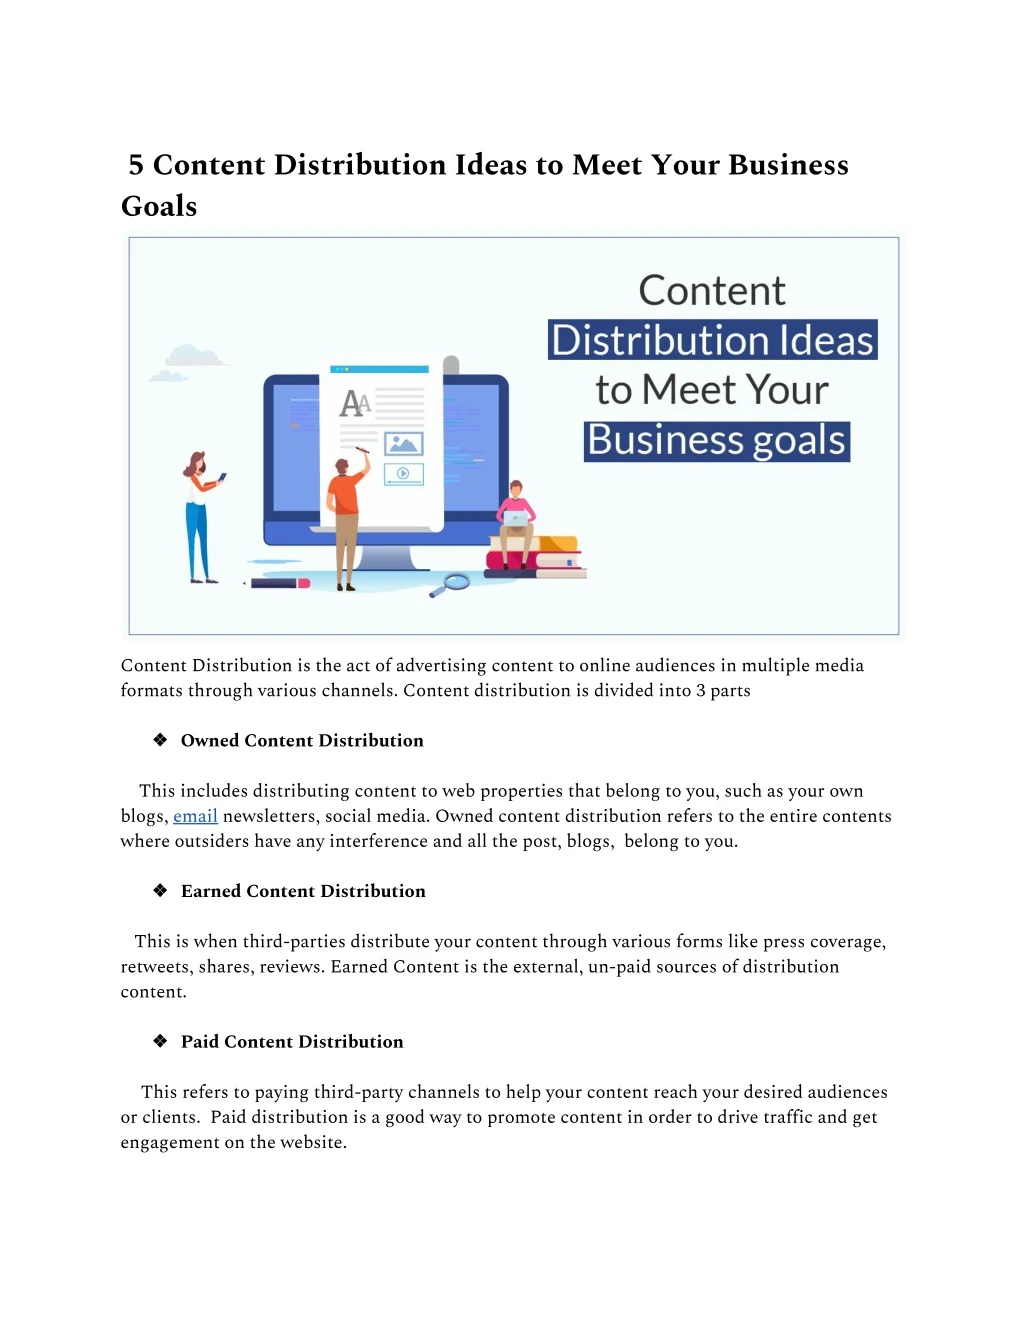 5 content distribution ideas to meet your